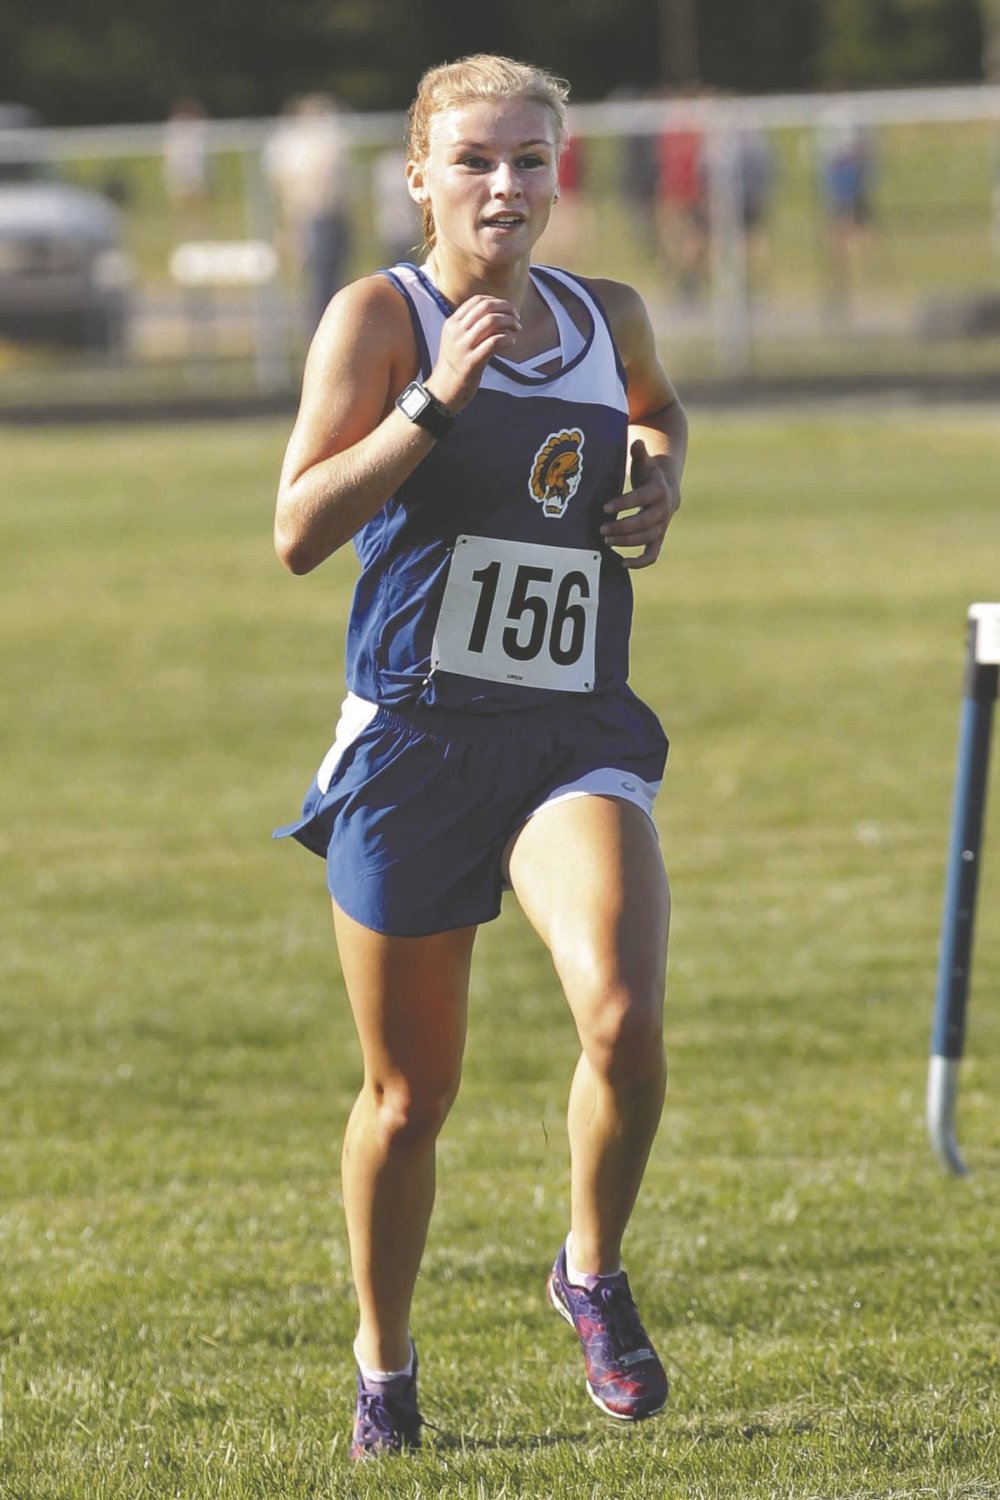 Madison Fry of Crawfordsville won the Fountain Central Cross Country Grand Prix in a time of 19:56. She was the lone girl to finish under 20 minutes.